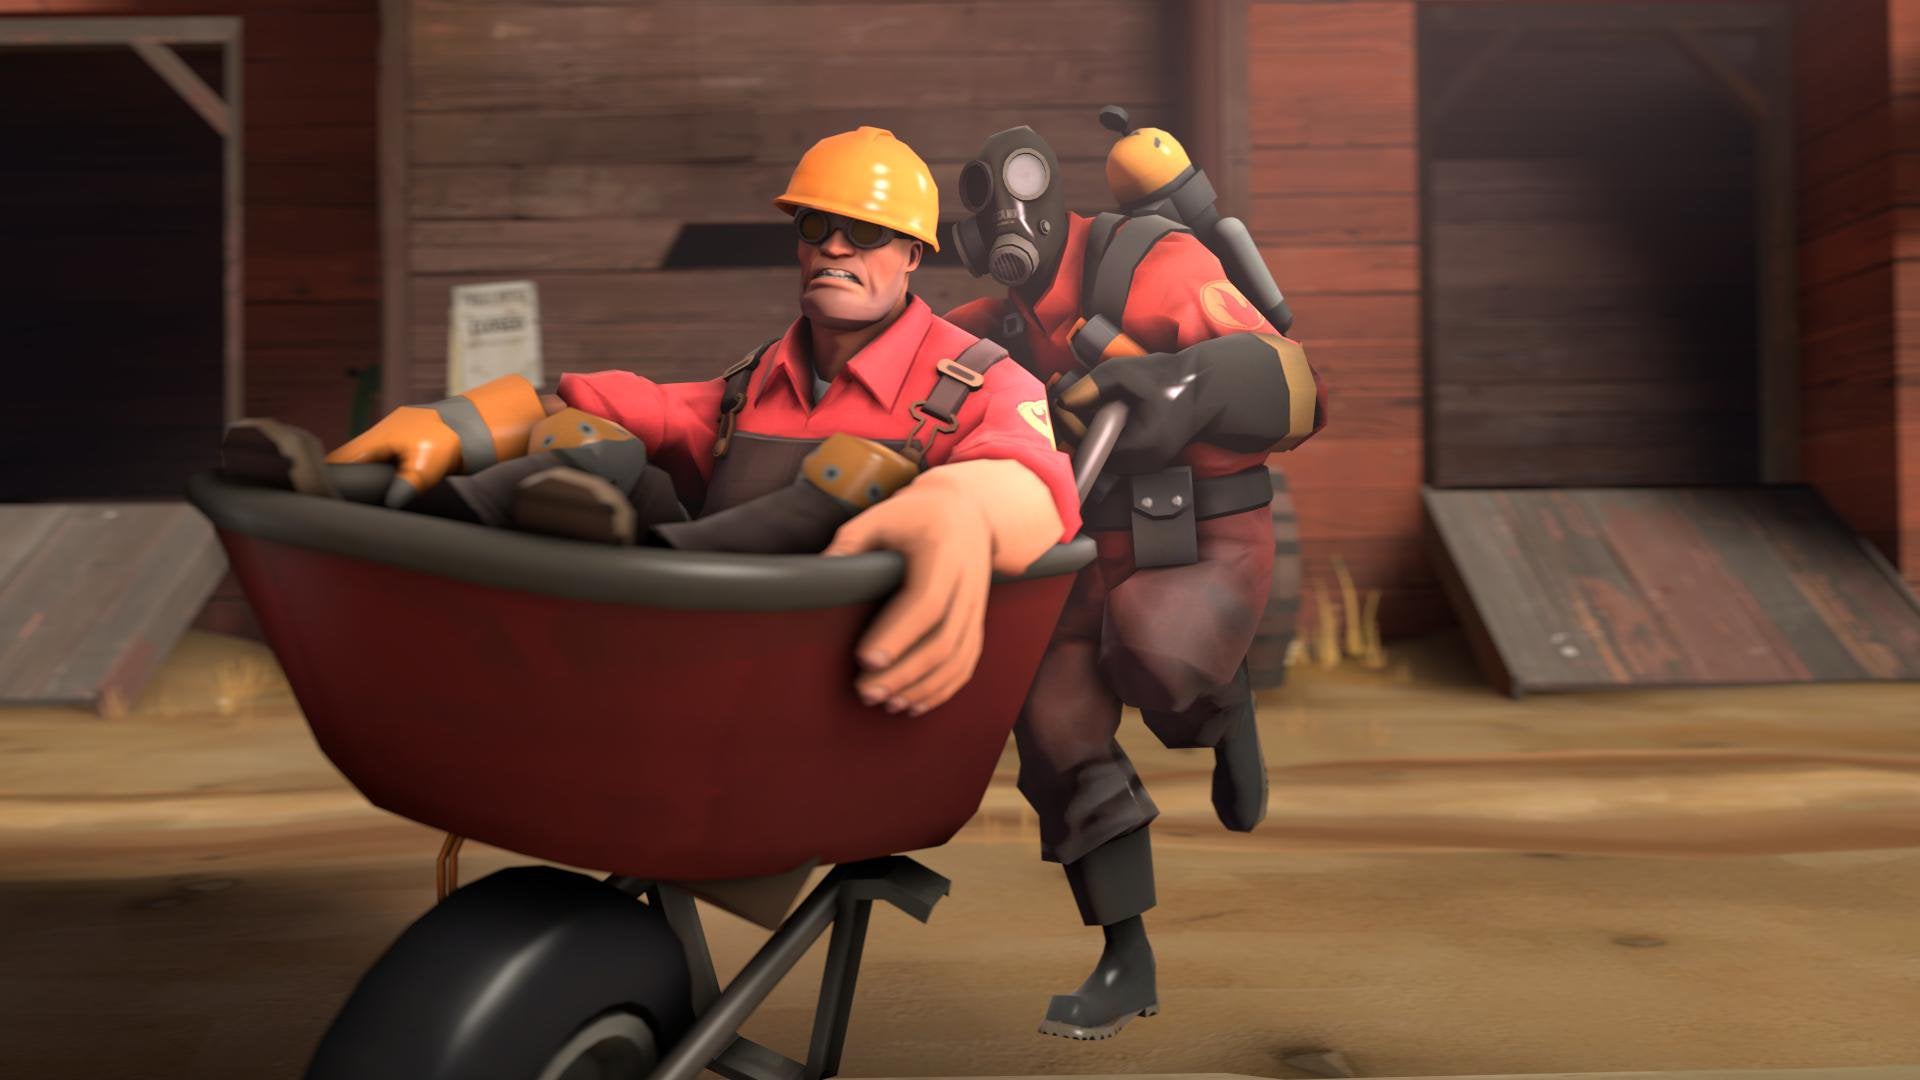 Tf2 1920X1080 Wallpapers